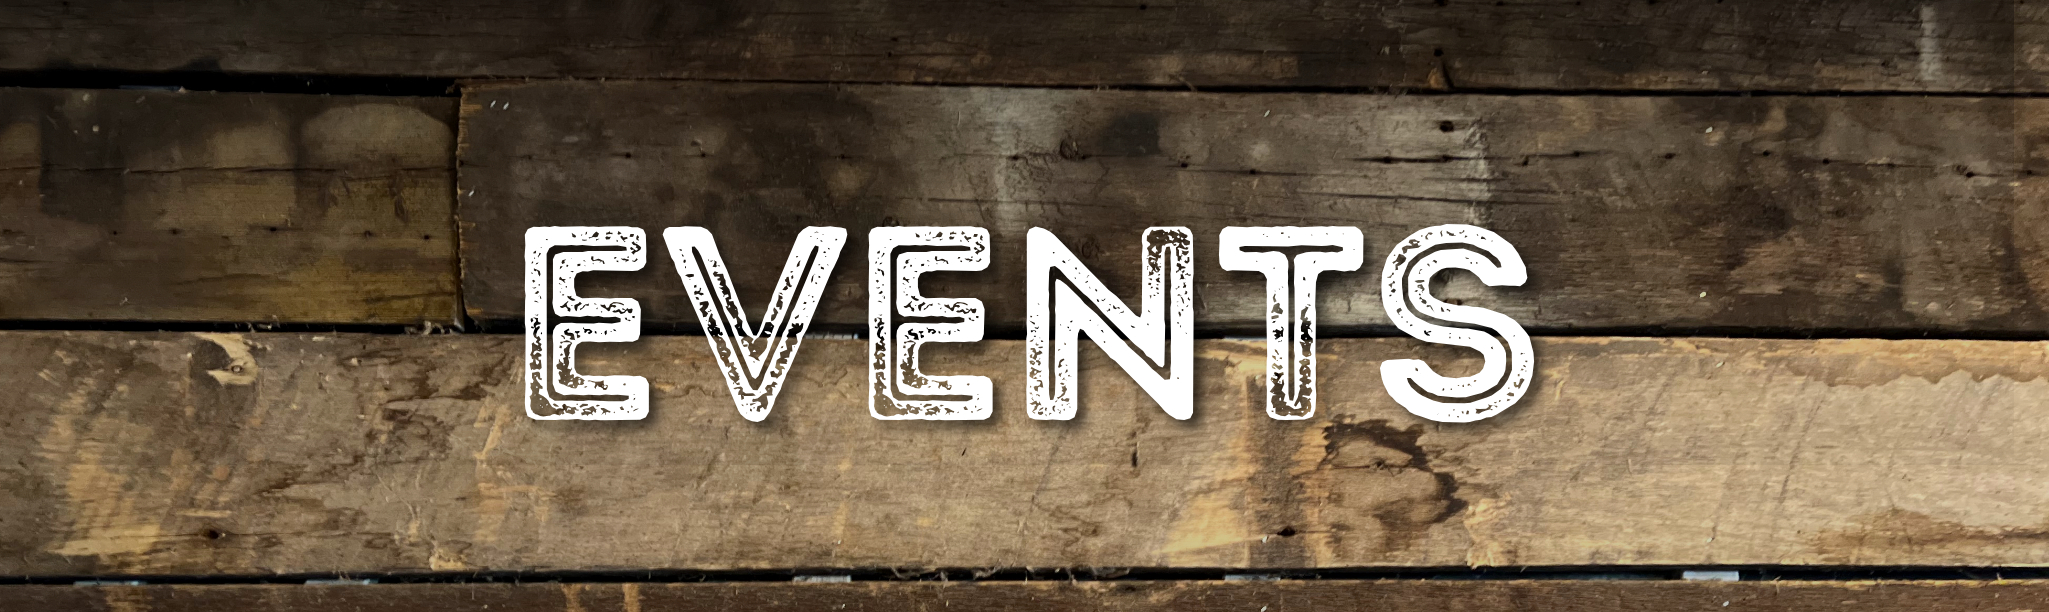 St. Albert Events Calendar FREE Things to do in St. Albert during the